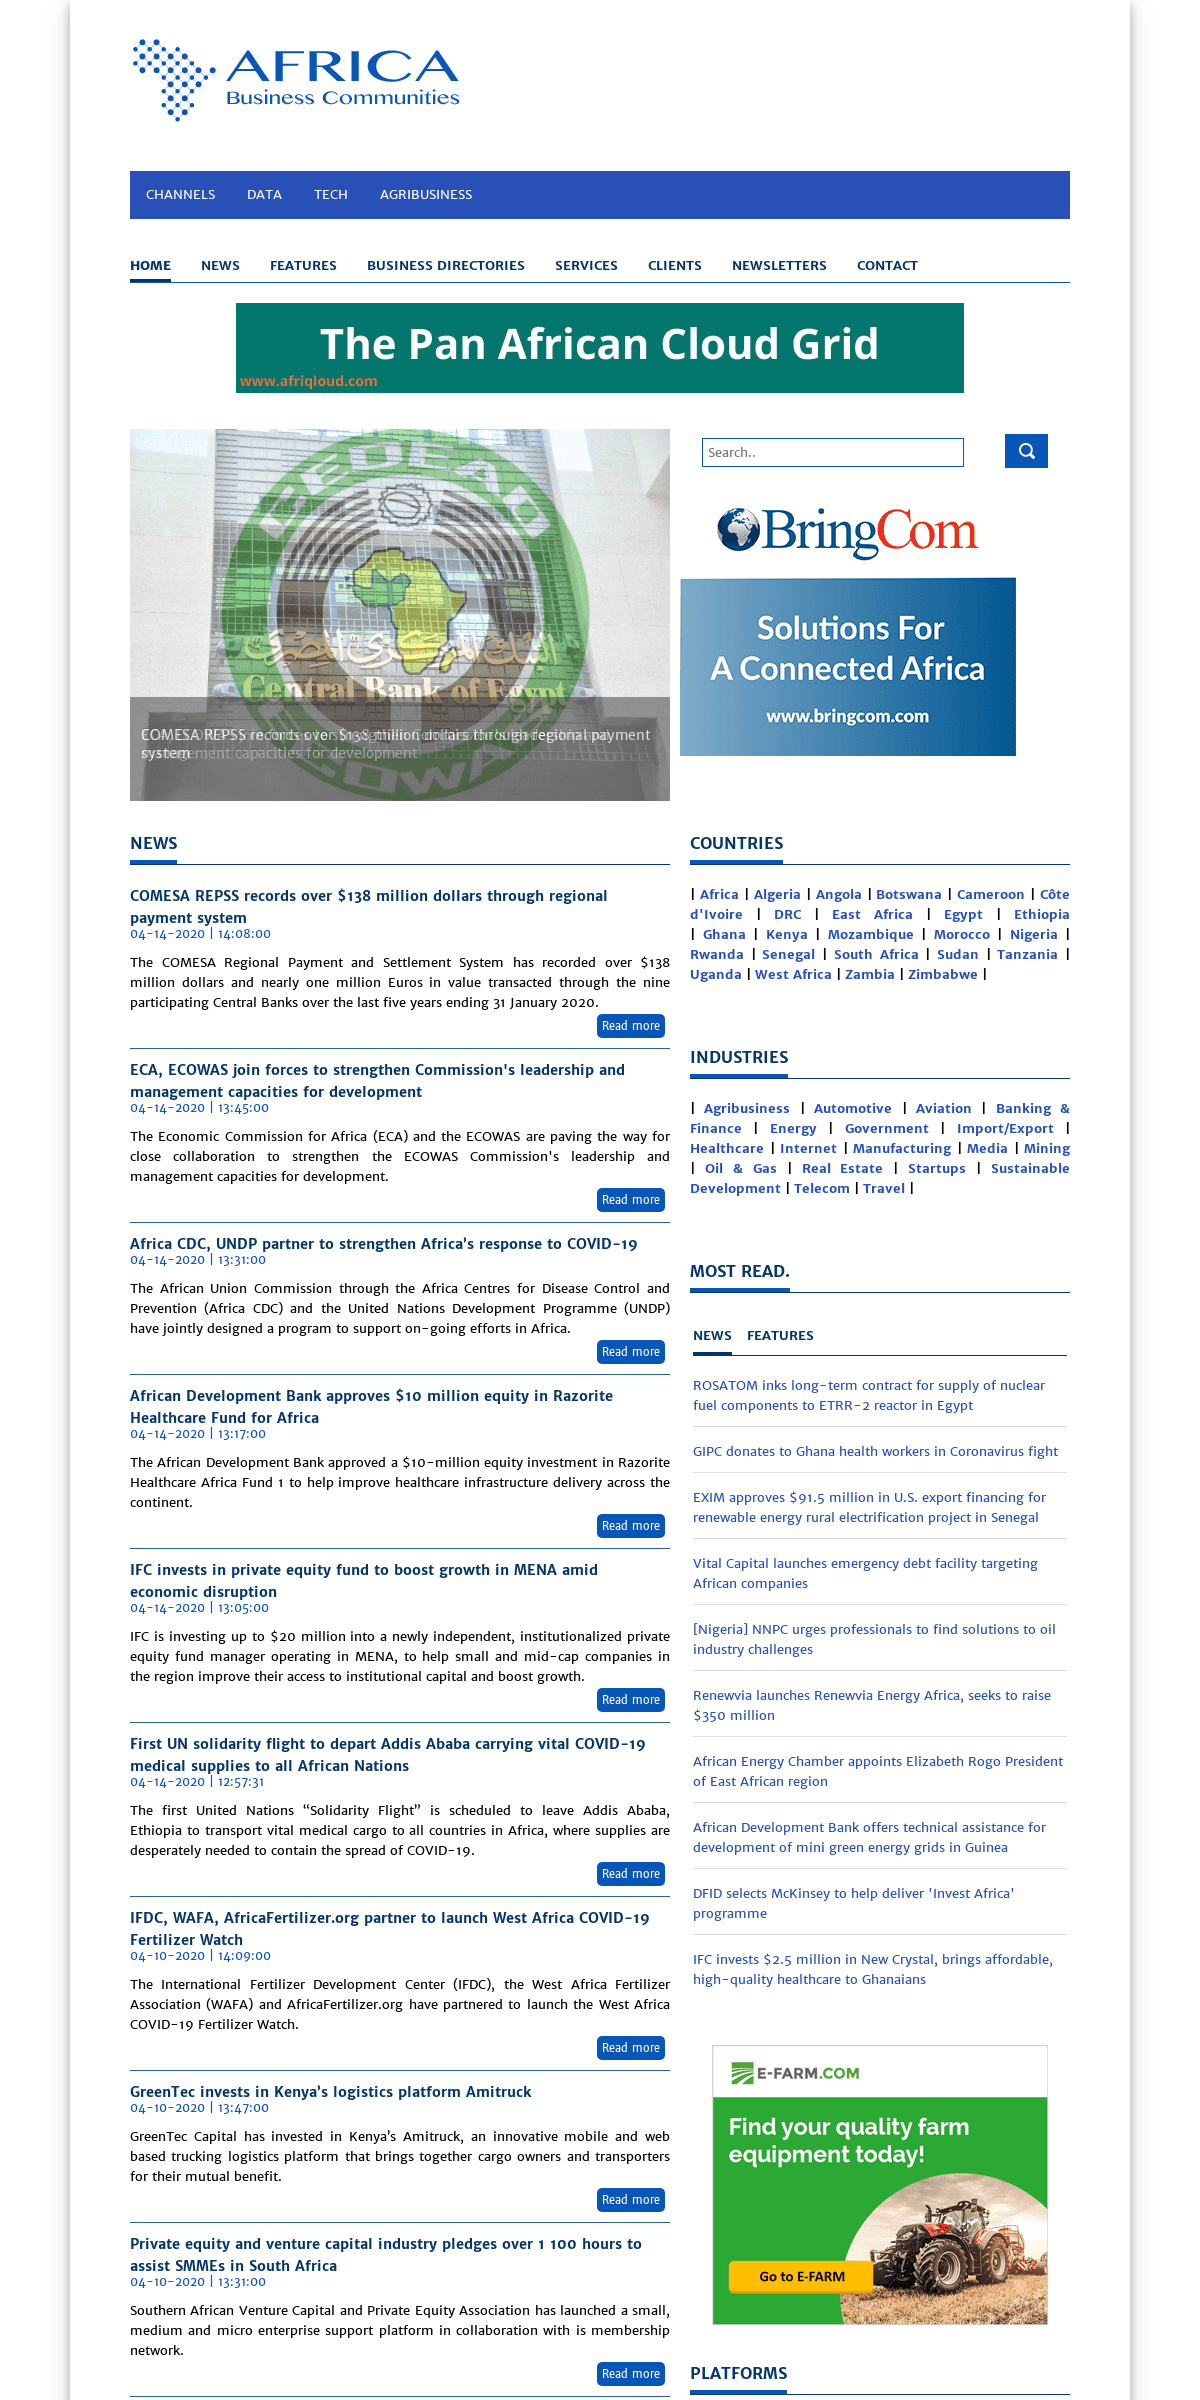 A complete backup of africabusinesscommunities.com